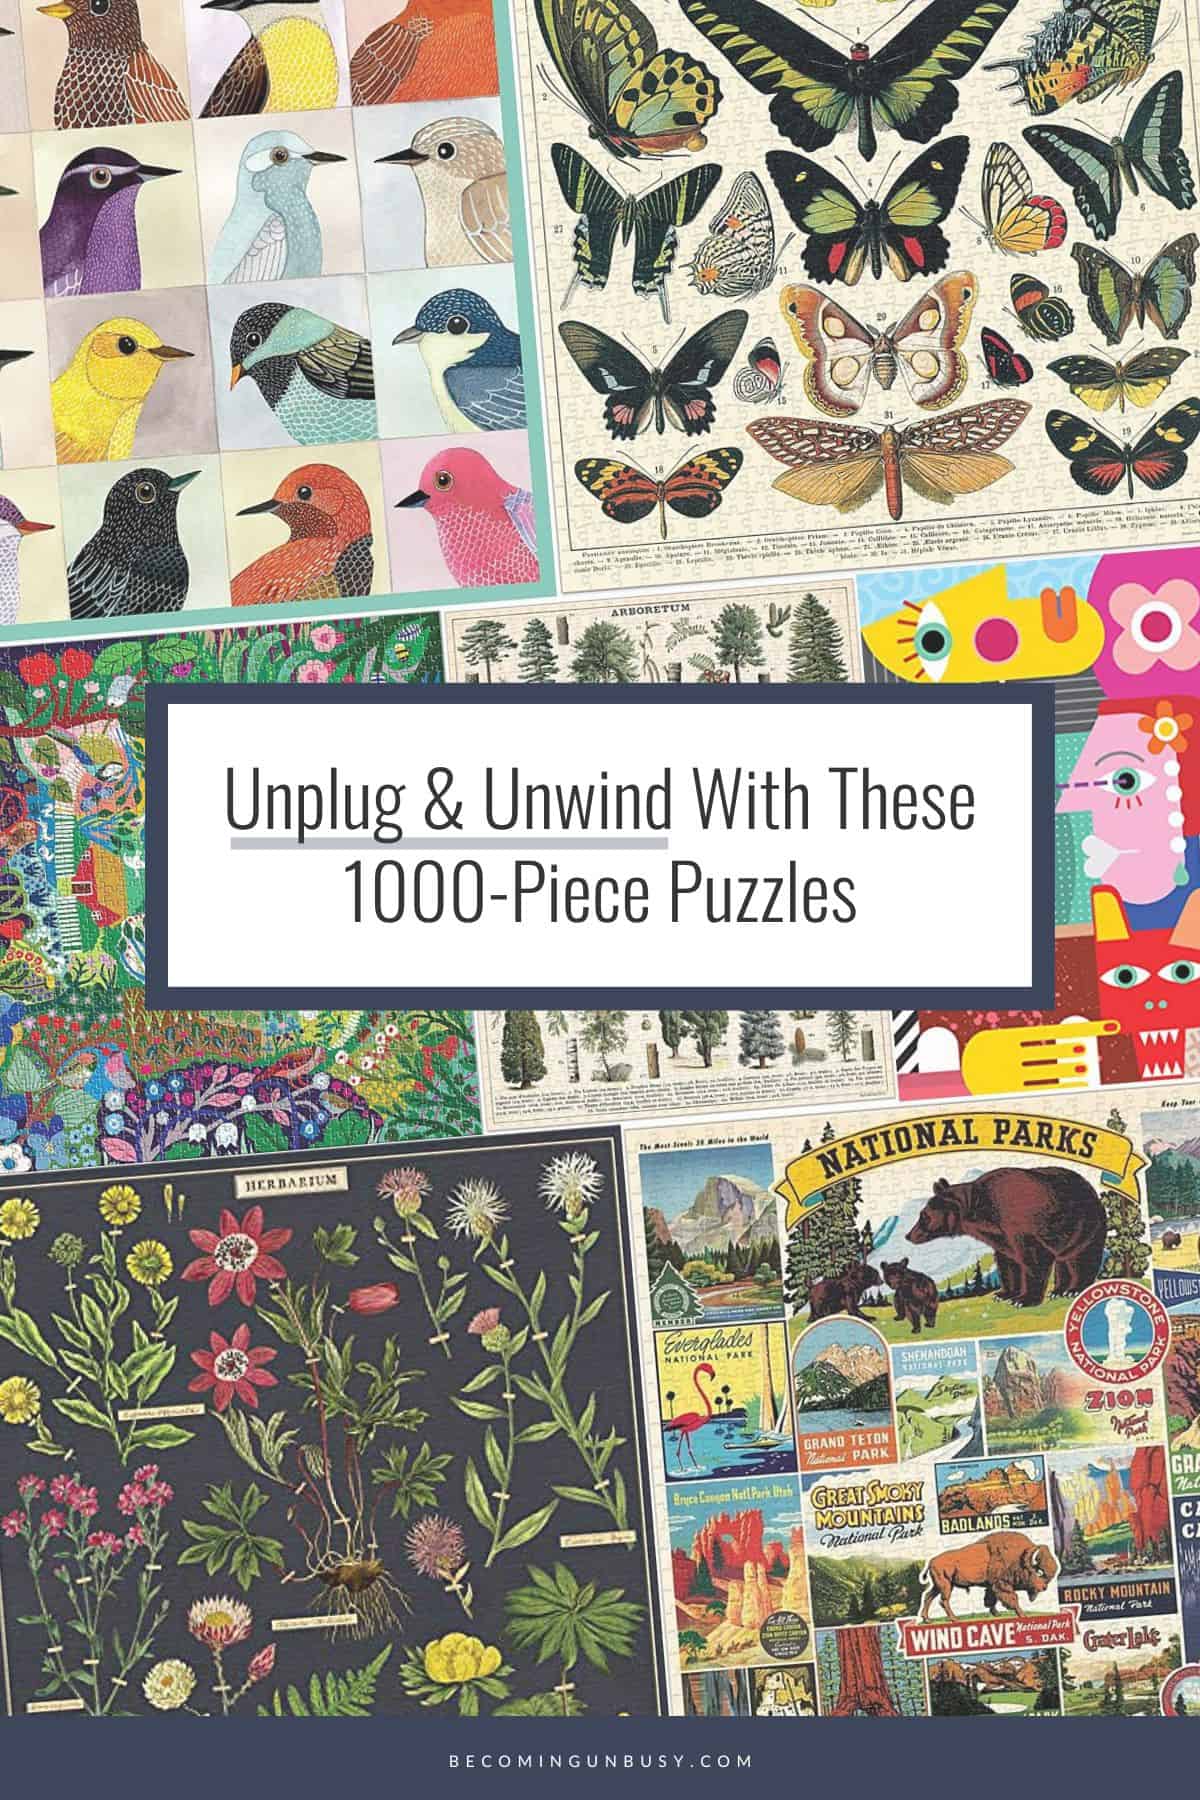 A collage of 1000 piece puzzles with the headline, "Unplug & Unwind With These Beautiful 1000-Piece Puzzles" written over top.